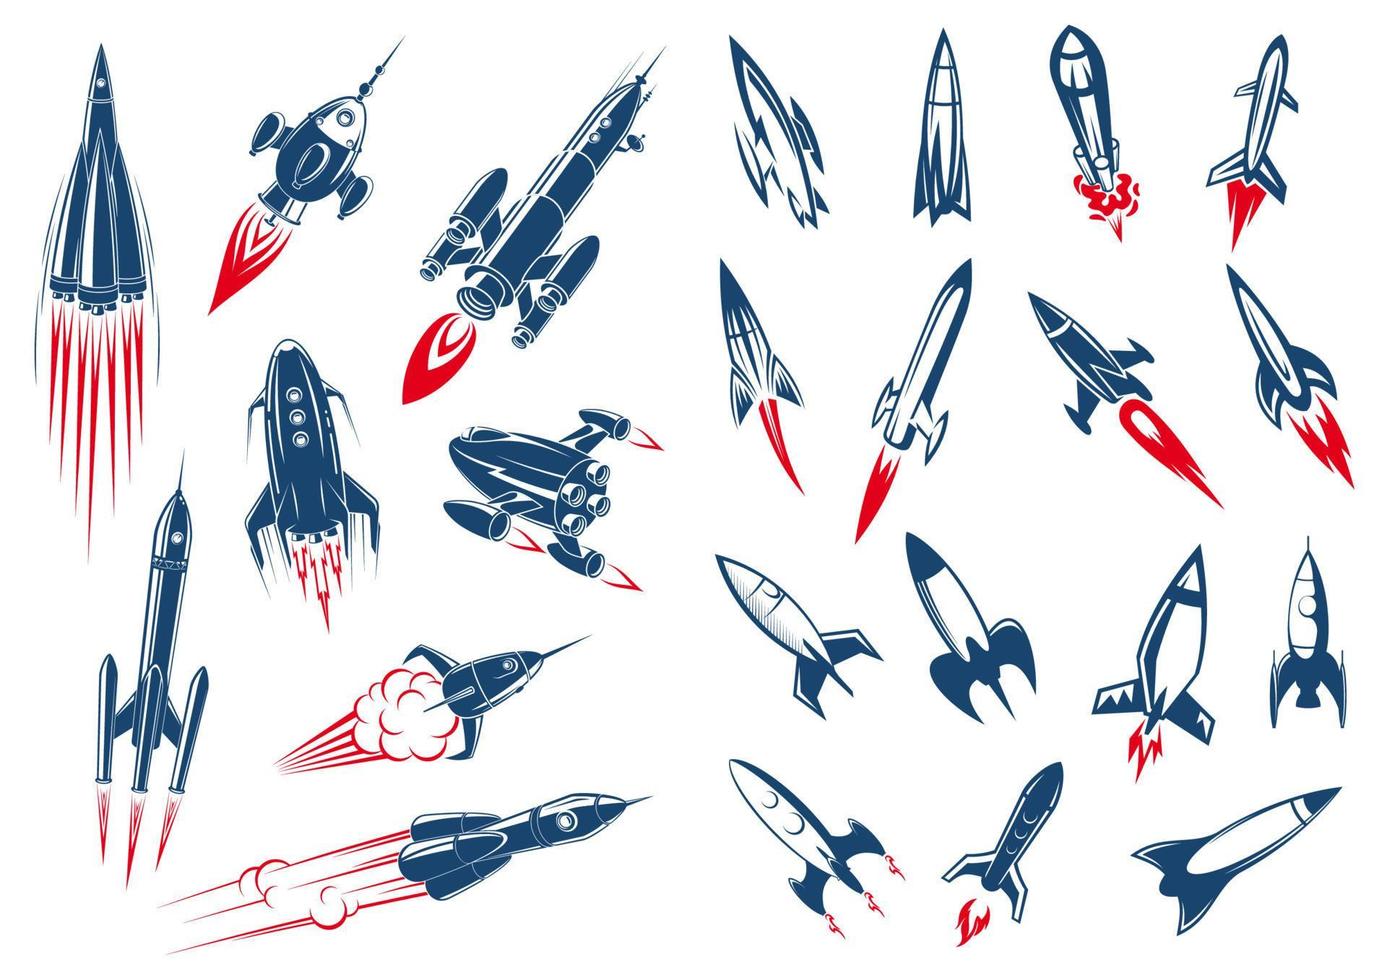 Space rocket ships and military missiles vector